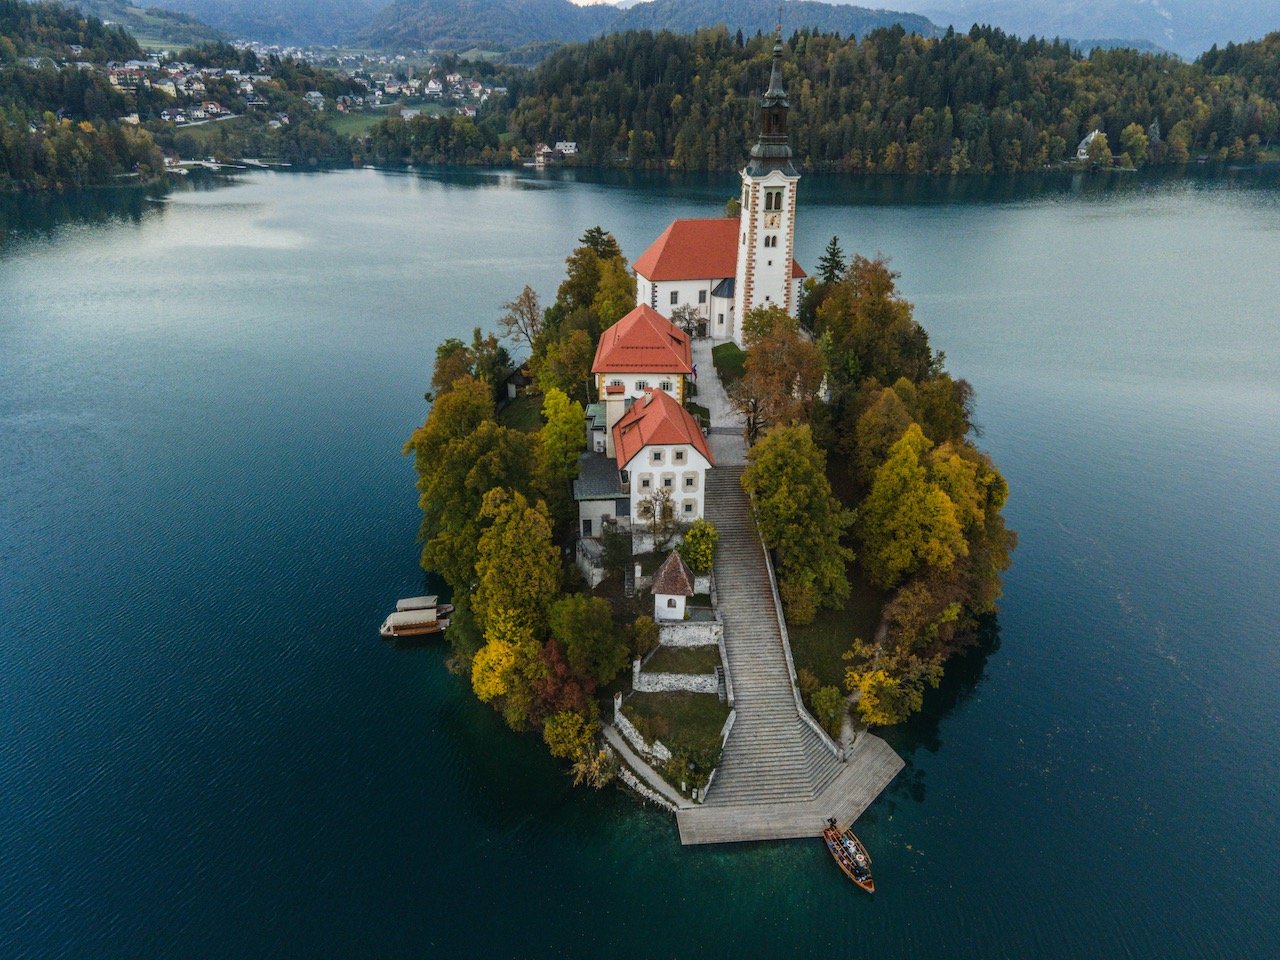   Pilgrimage Church of the Assumption of Maria, Bled, Slovenia (ISO 400, 4.5 mm,  f /2.8, 1/40 s)  